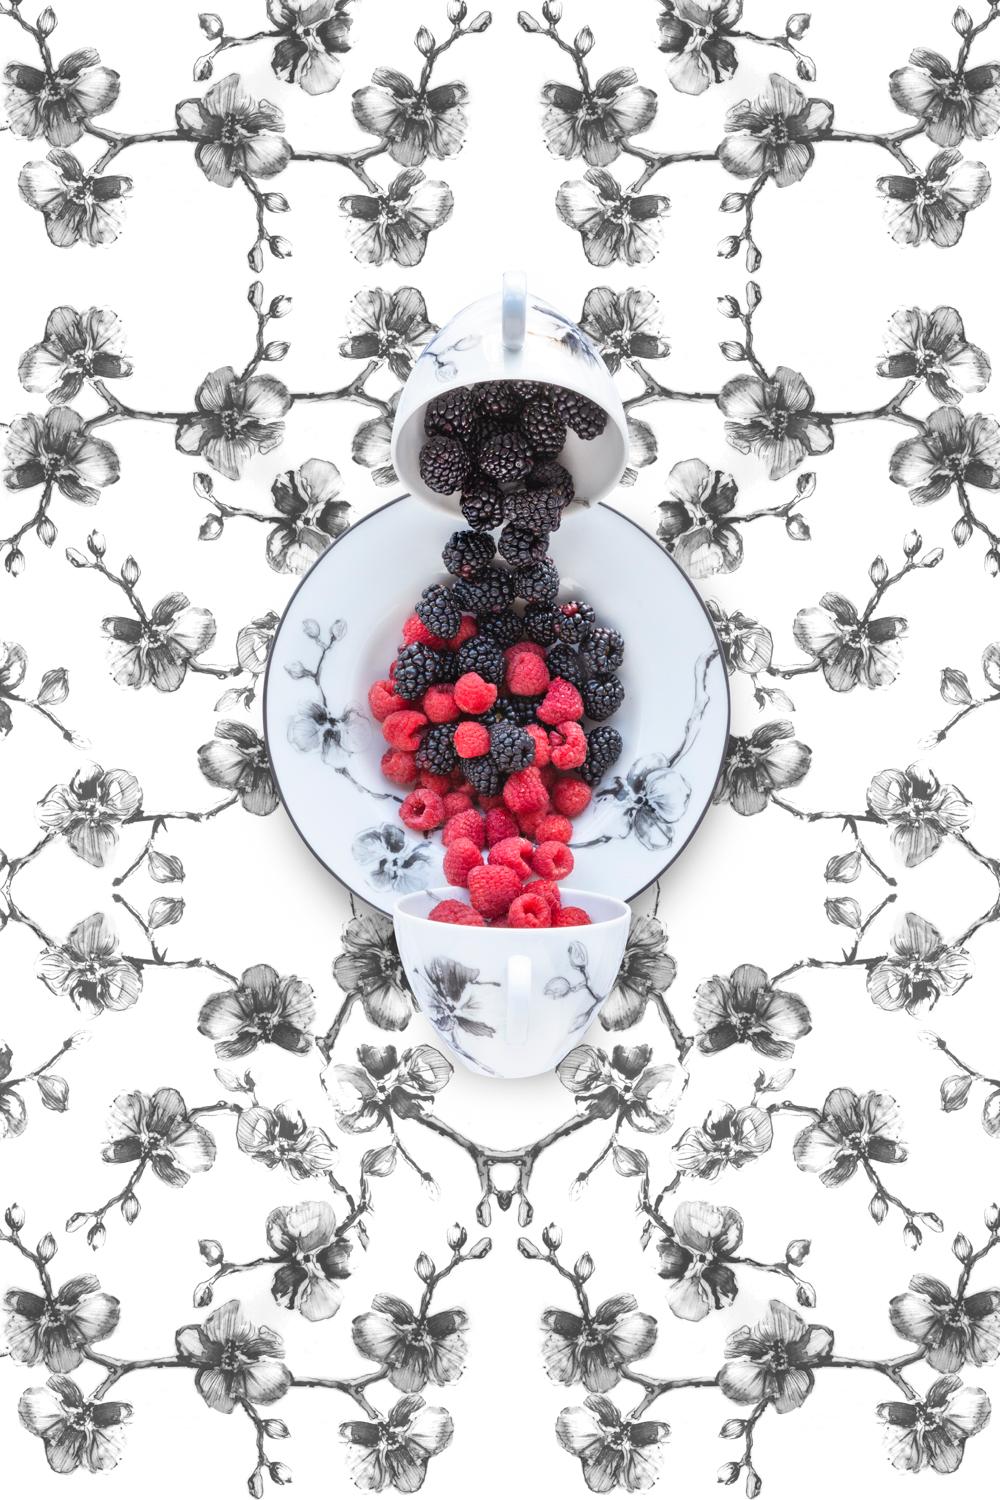 JP Terlizzi Still-Life Photograph - Aram Black Orchid with Berries, 2019